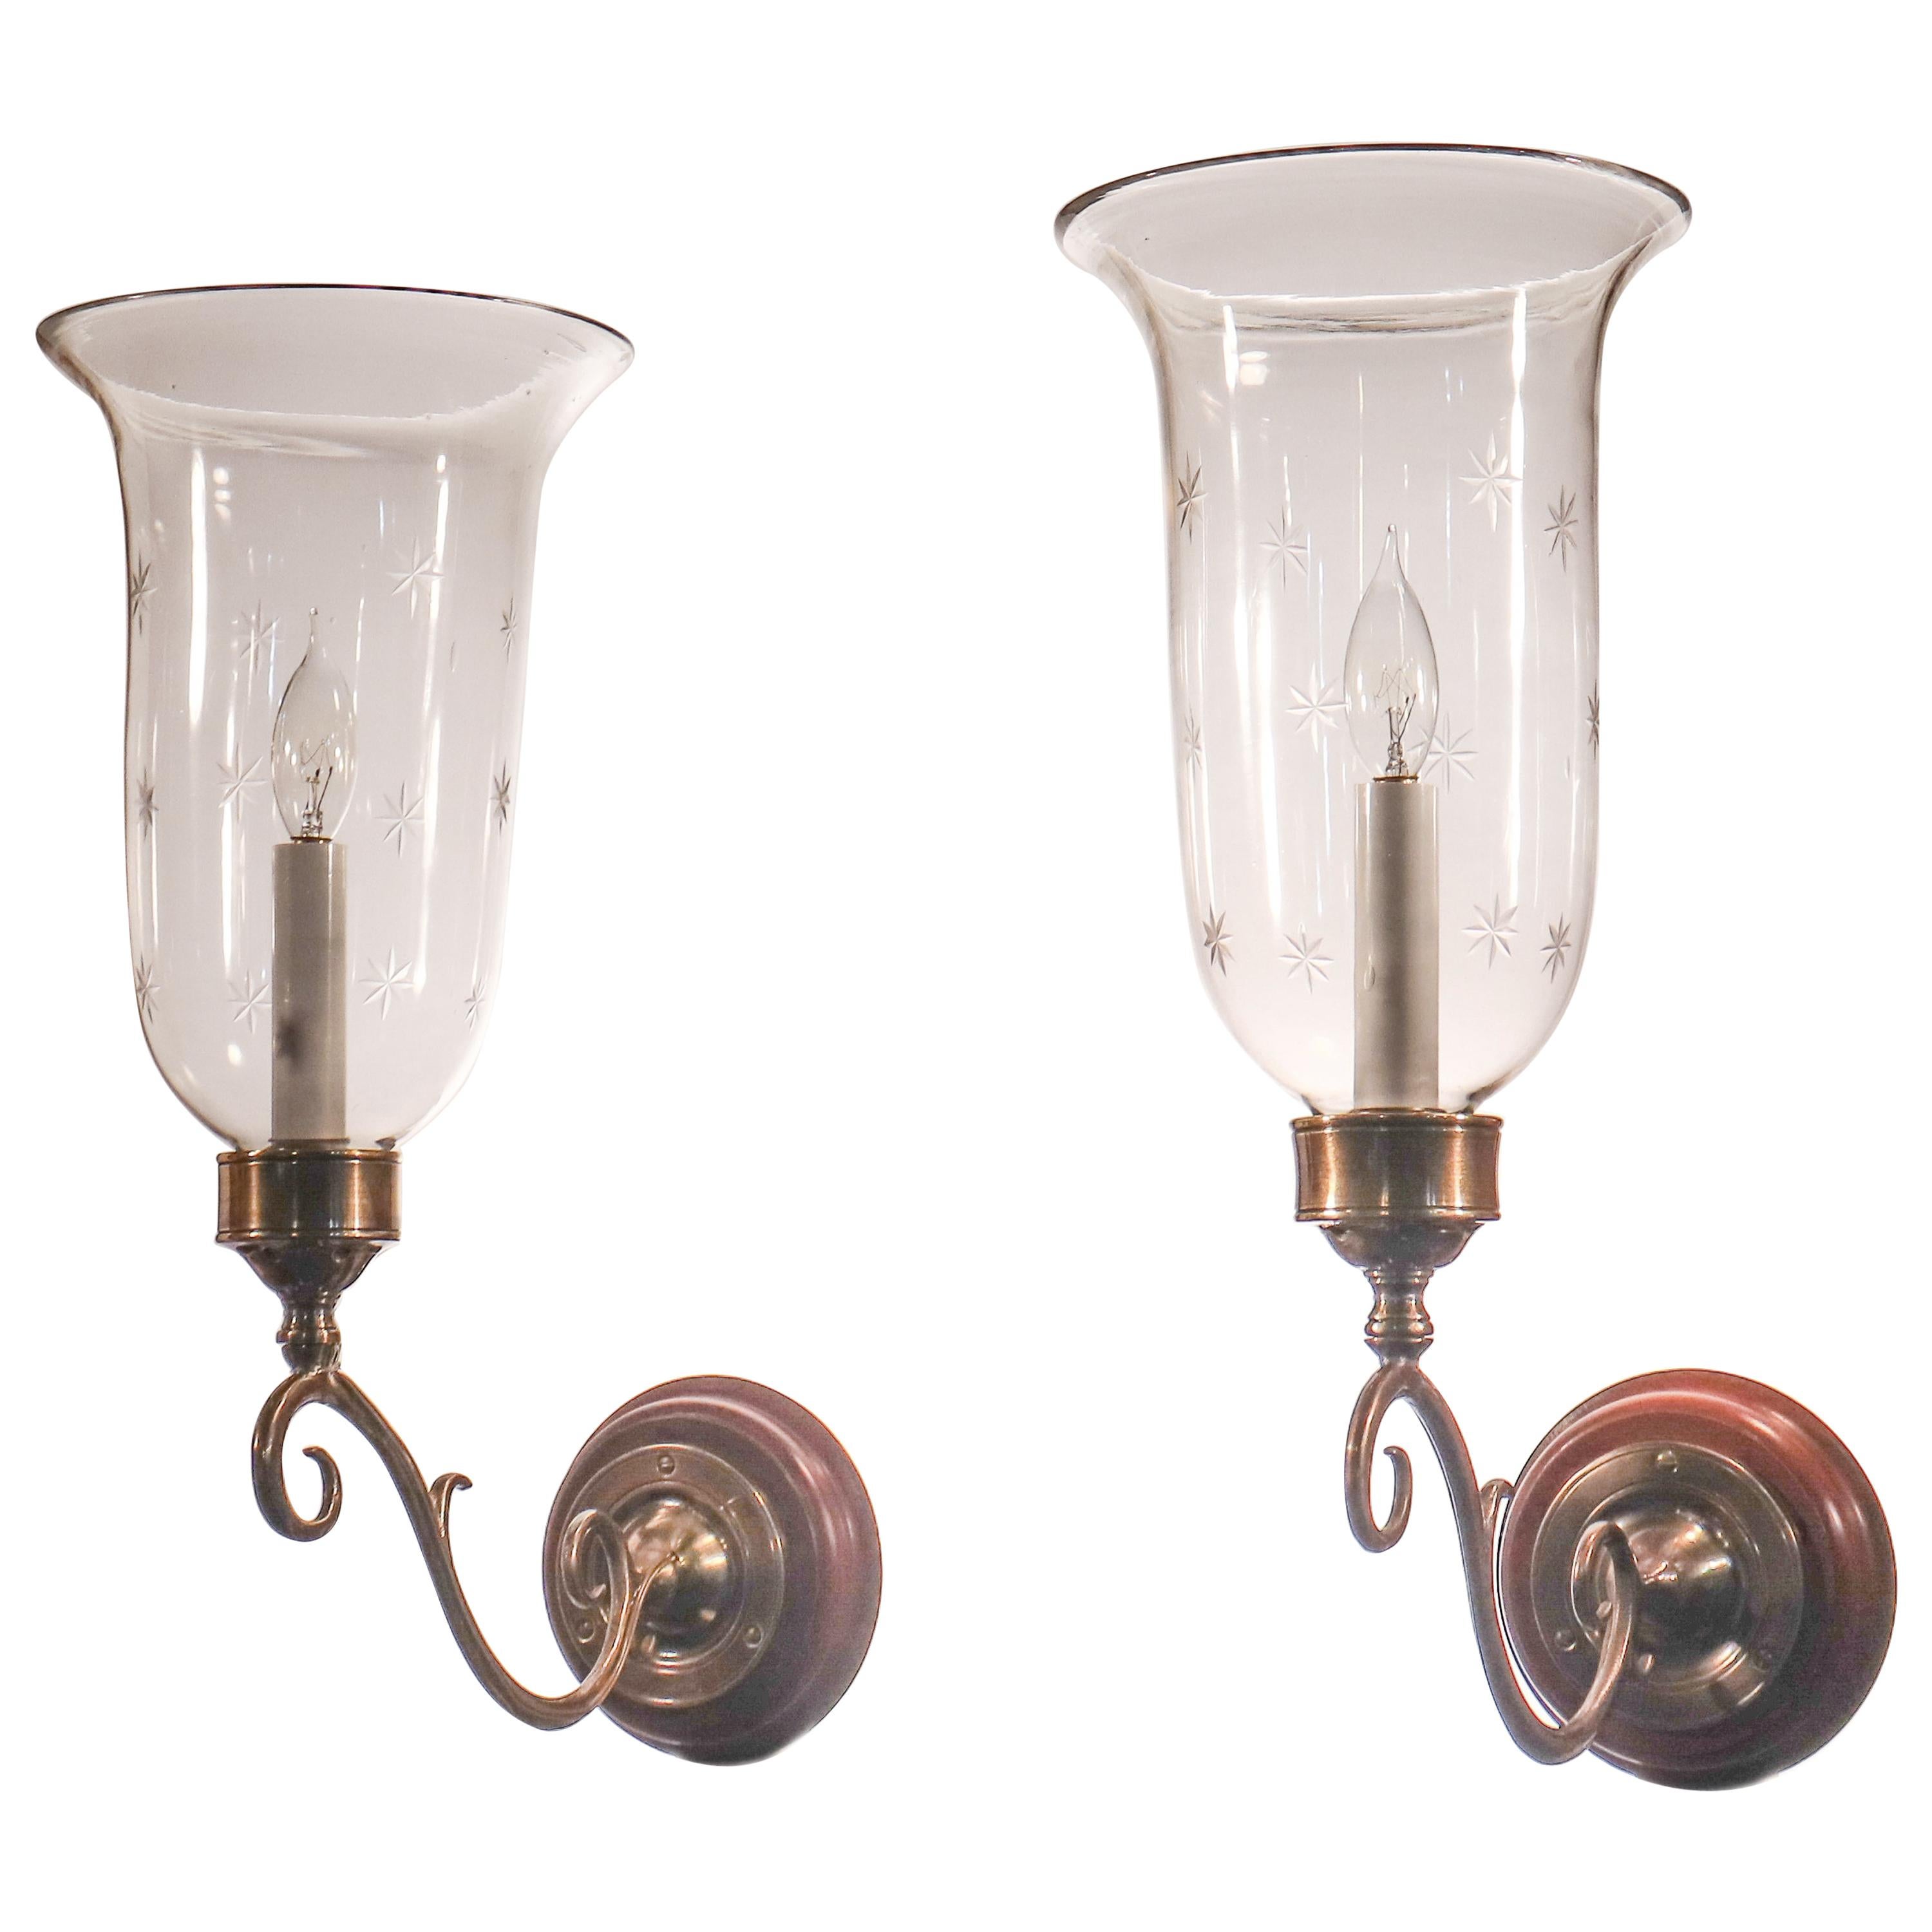 Pair of Antique Hurricane Shade Wall Sconces with Star Etching